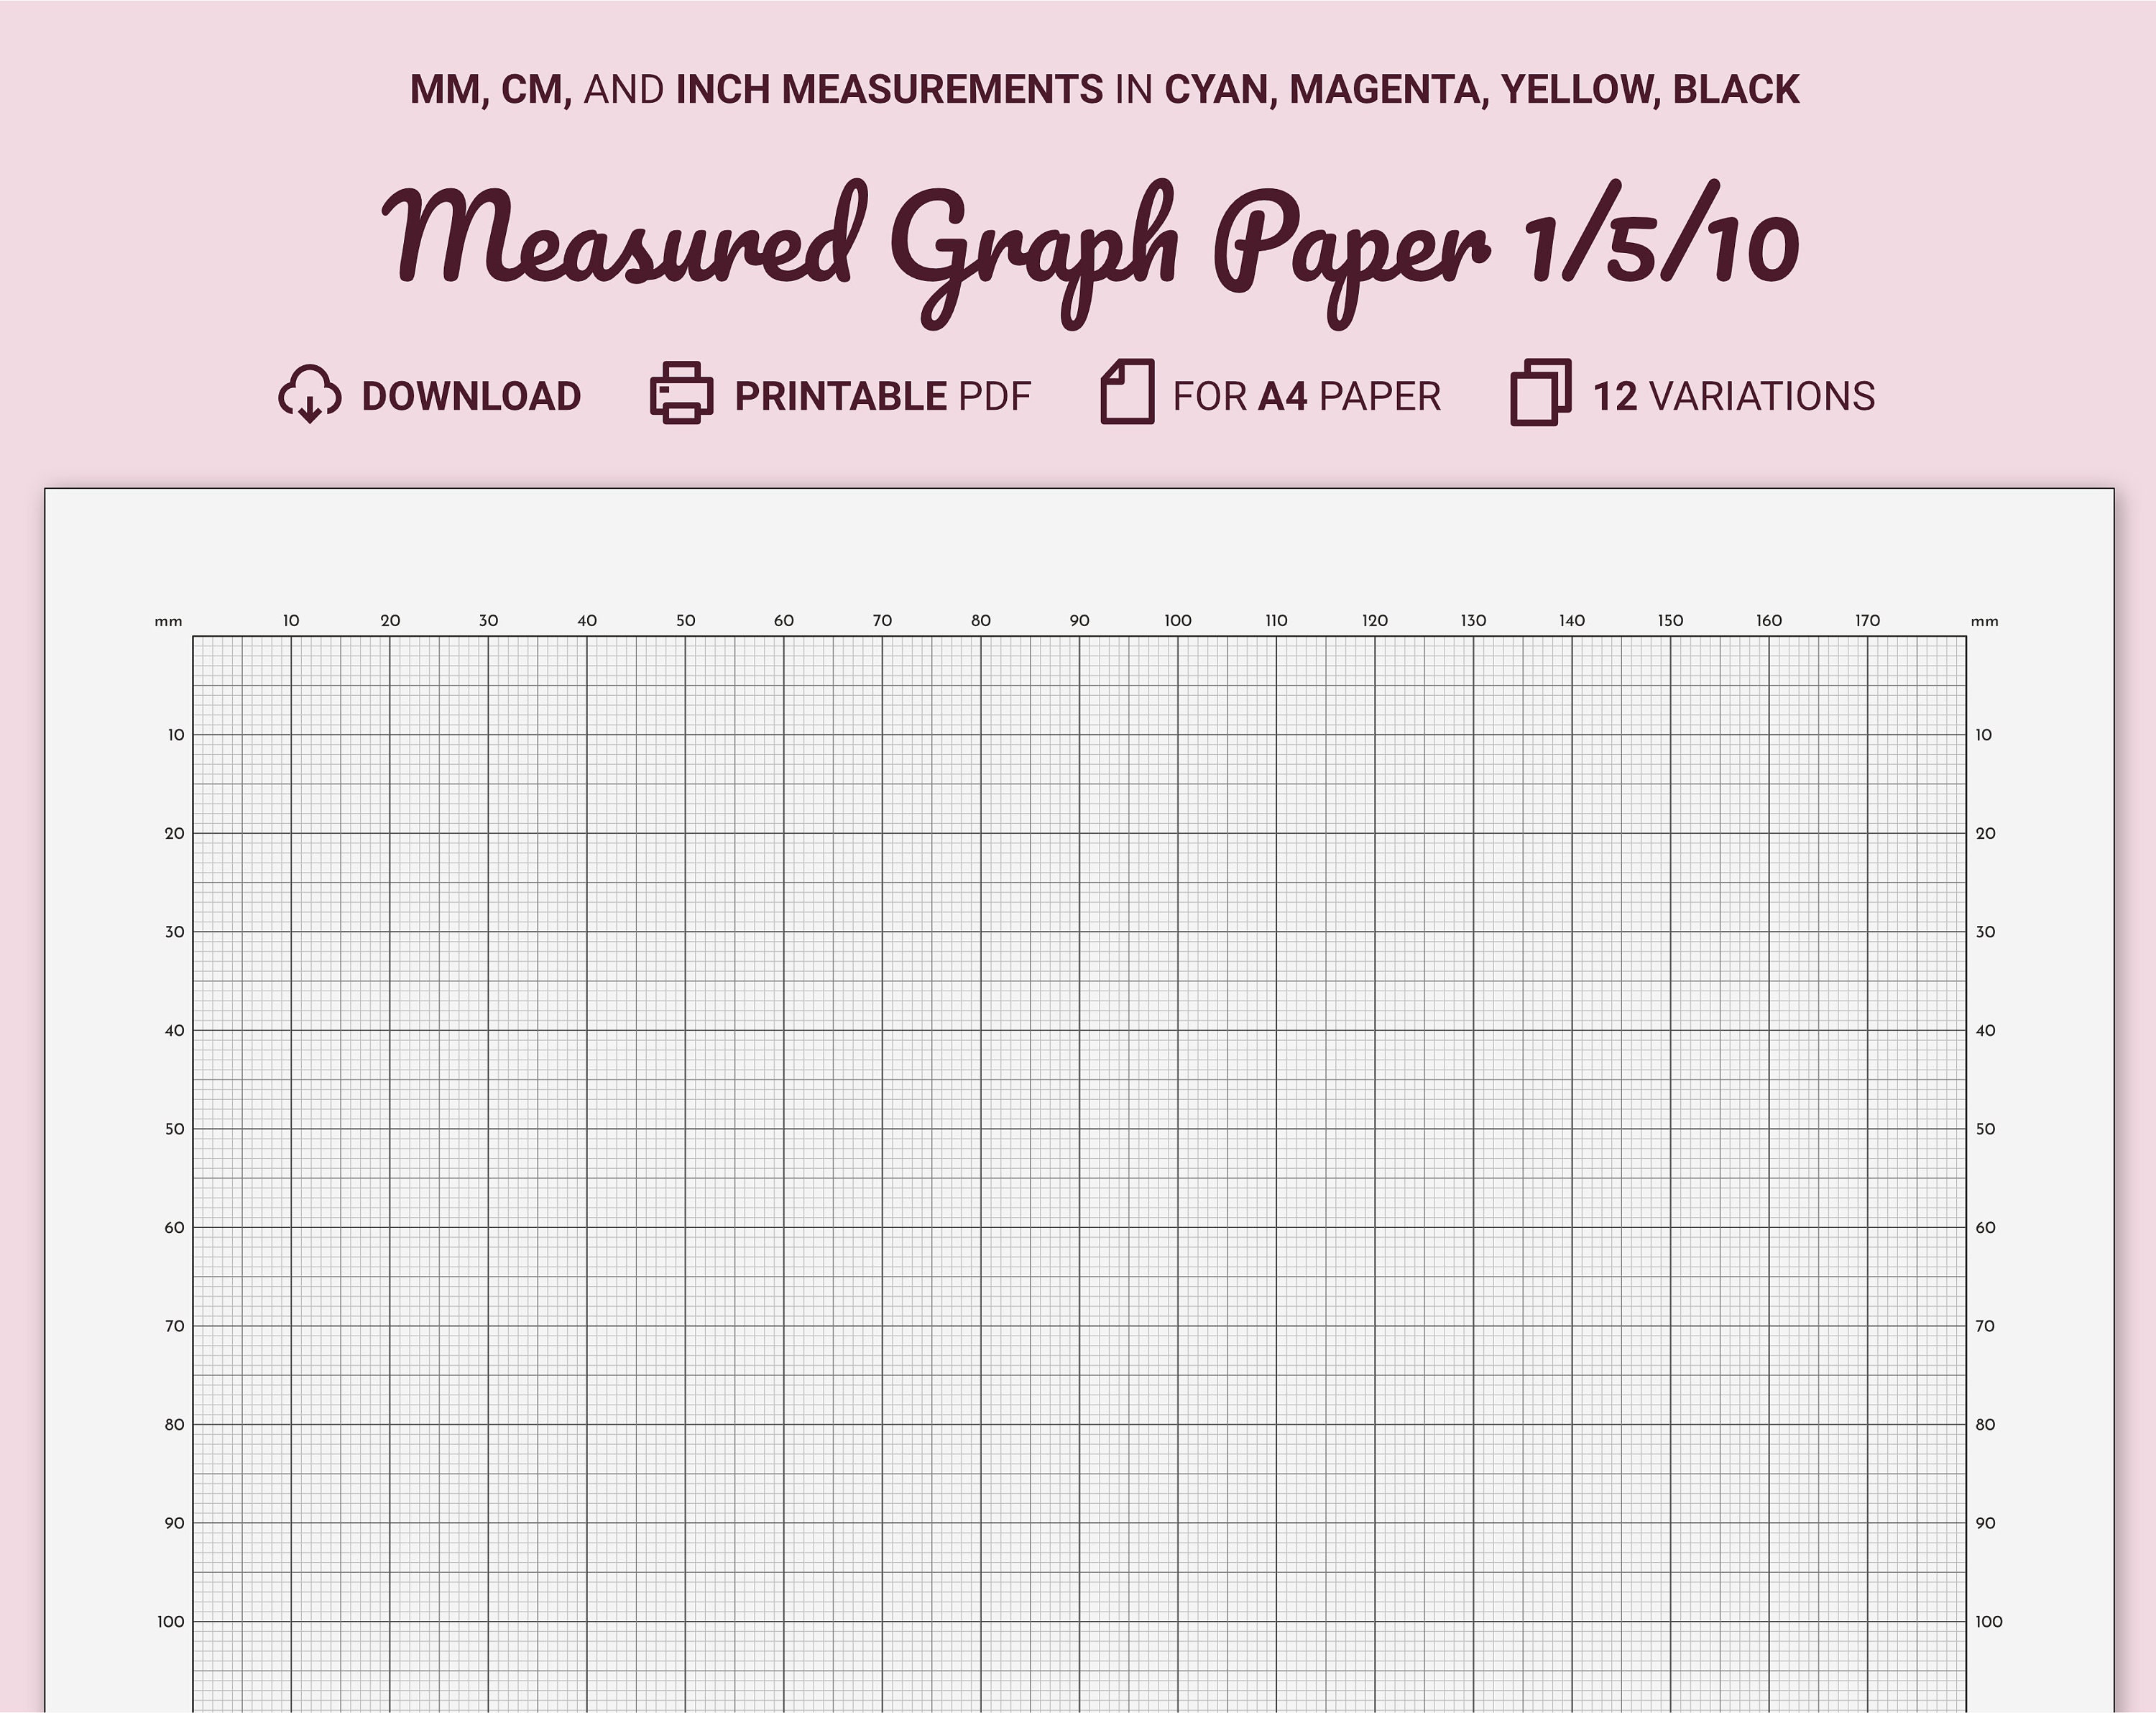 8 x GRID / GRAPH paper A1 size Imperial 1 inch 1/10th inch premium